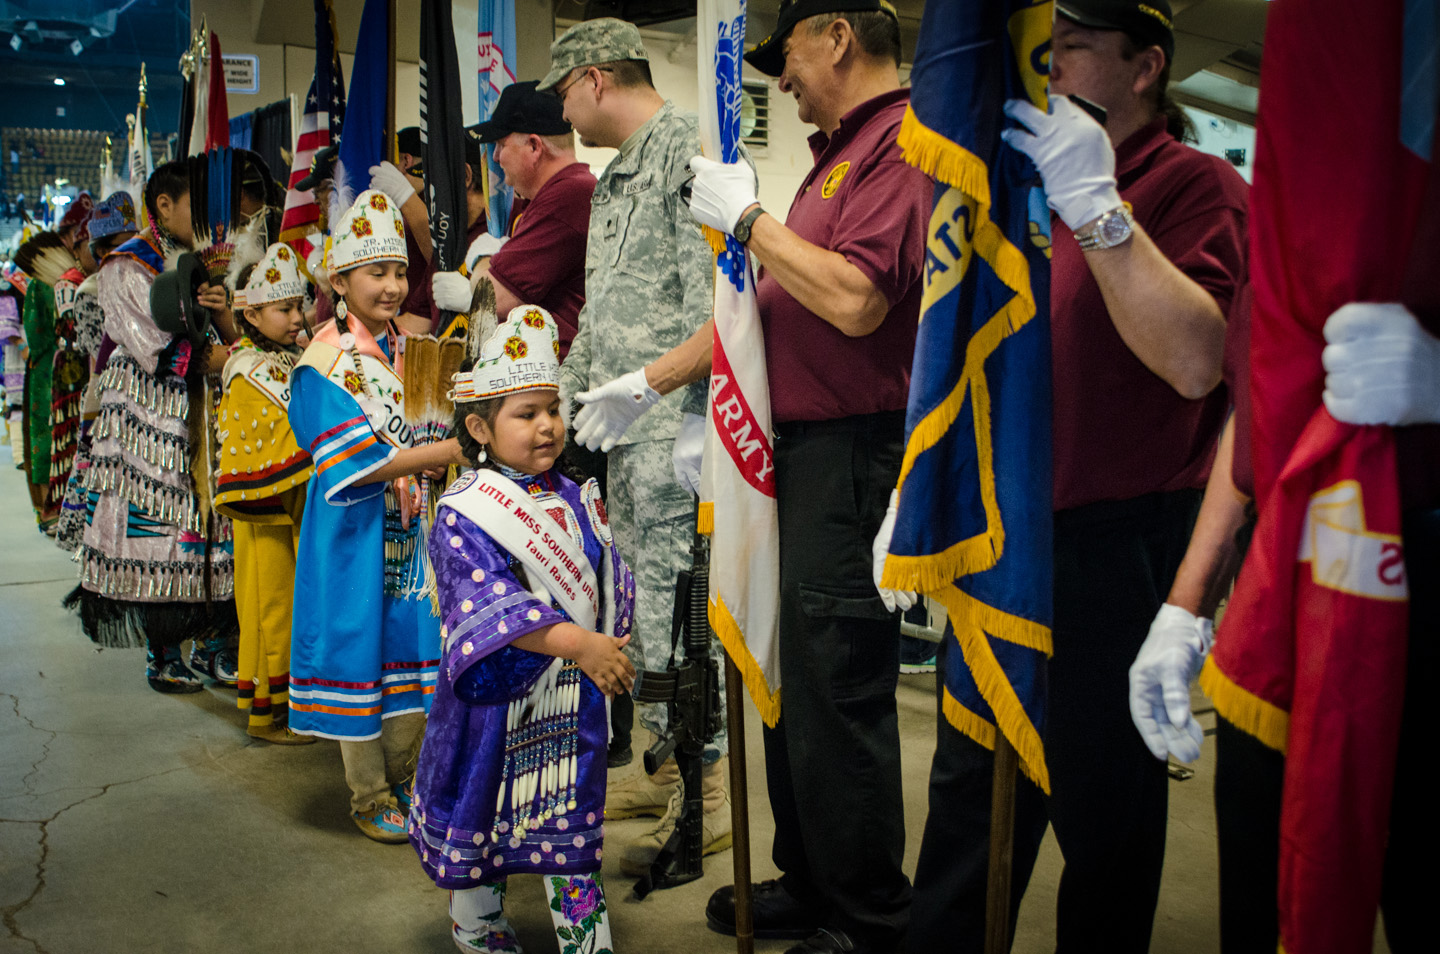 Southern Ute Royalty members pay their respects to veterans of the U.S. Armed Forces following a grand entry on Saturday, March 23 that filled the Denver Coliseum as part of the 39th annual Denver March Powwow.